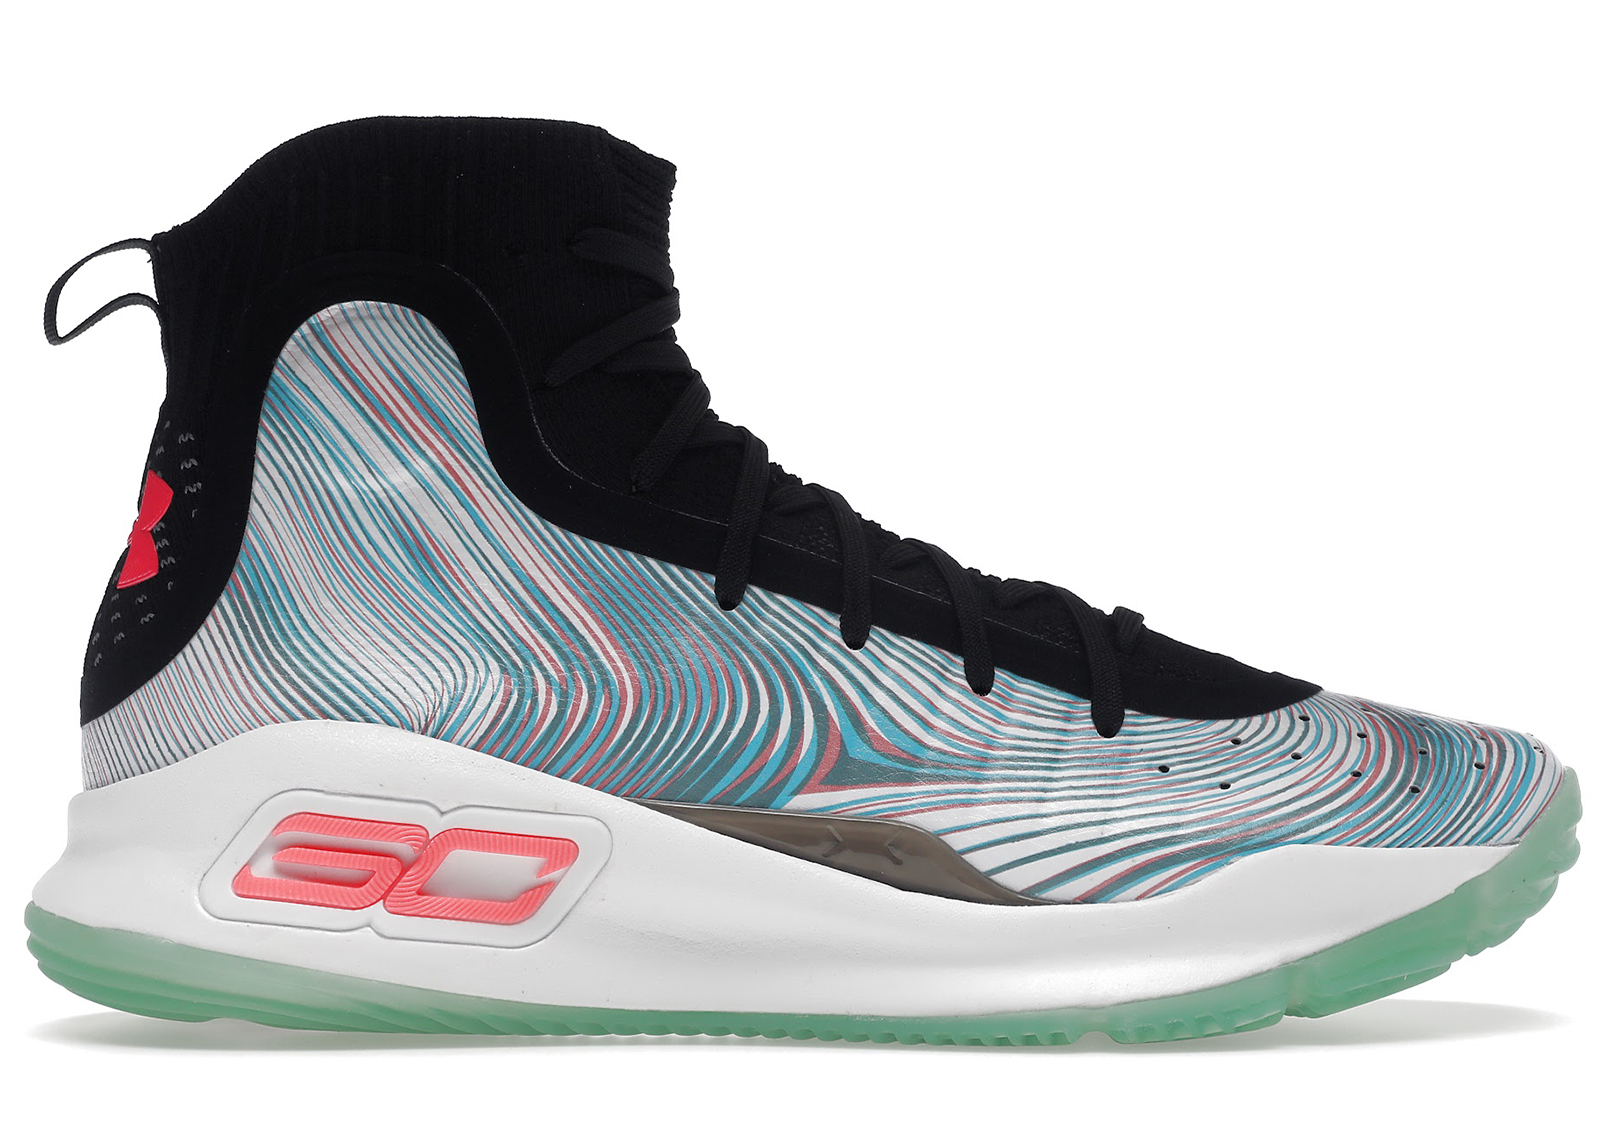 Under Armour Curry 4 More Magic